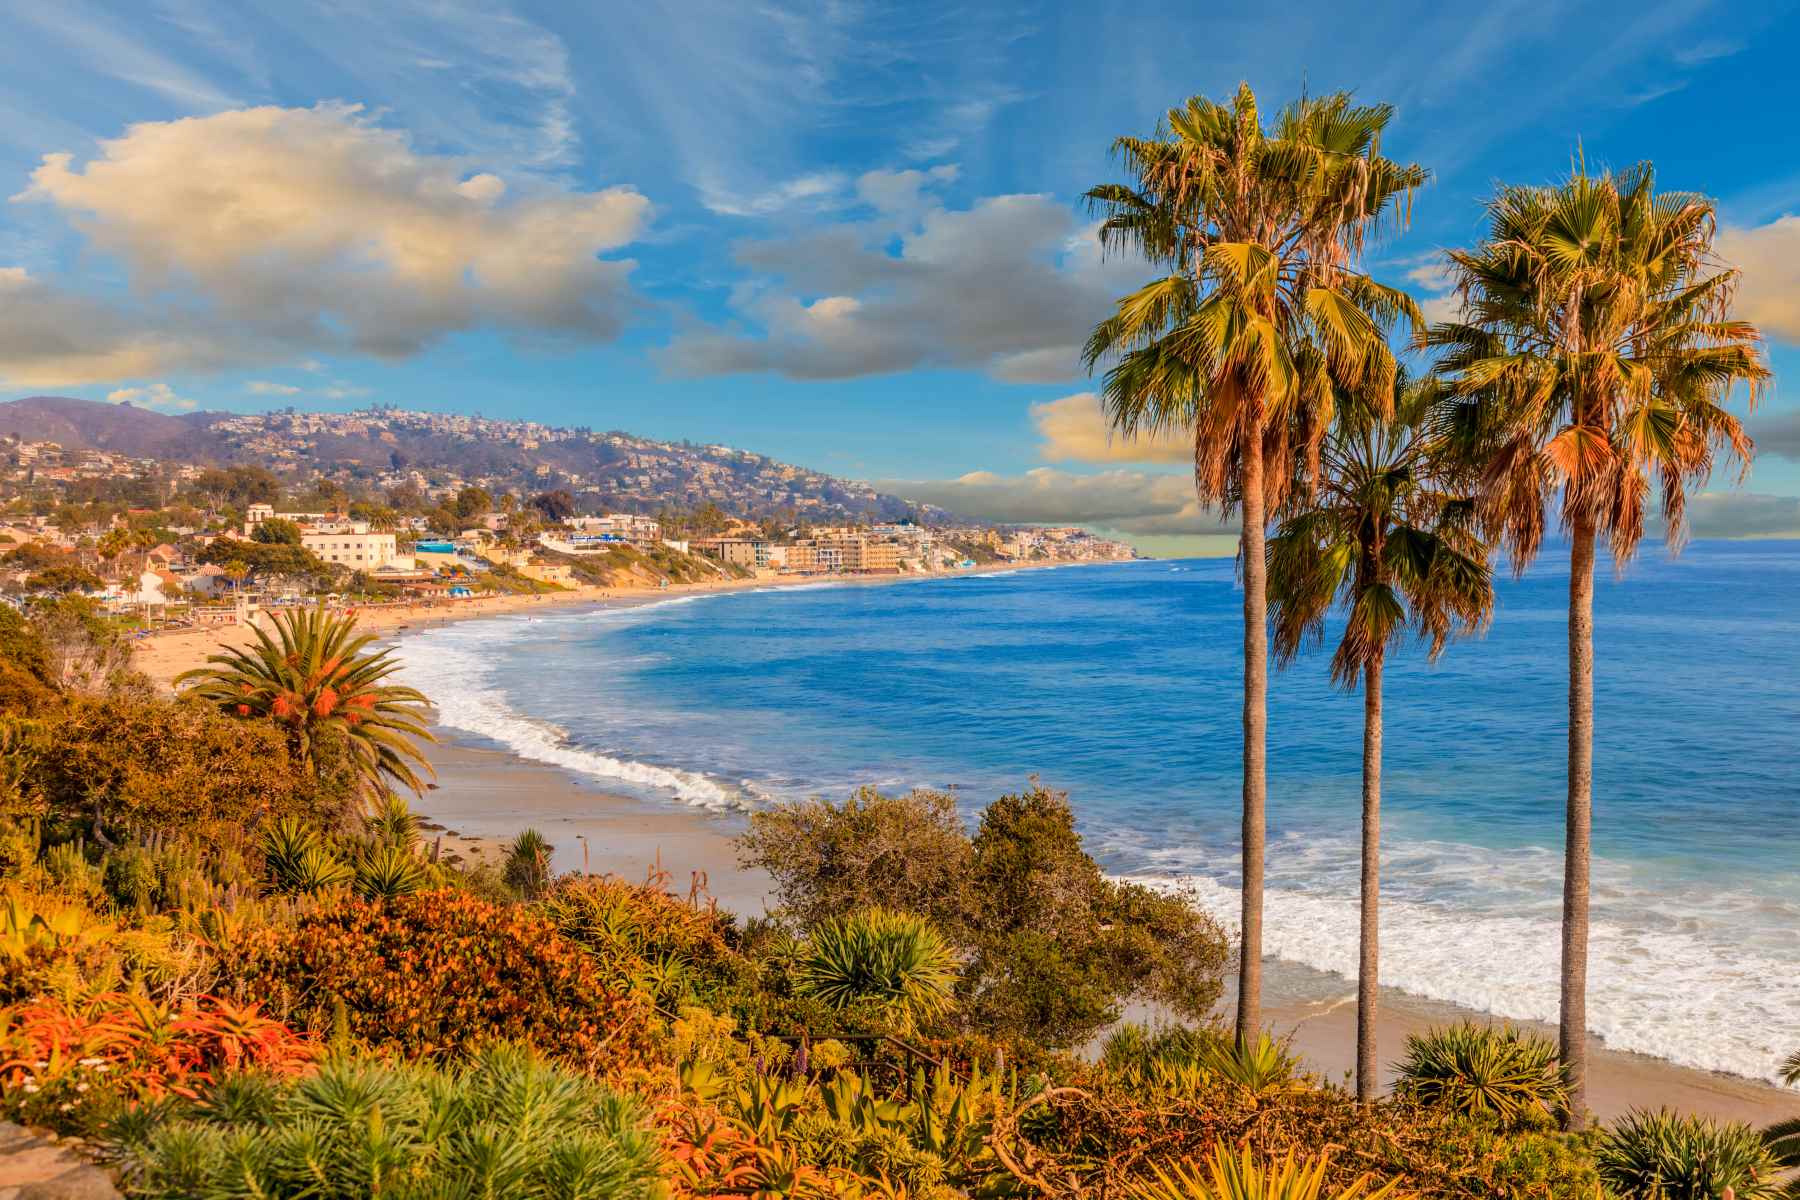 10 Fun Things To Do In Orange County, CA For An Epic Weekend